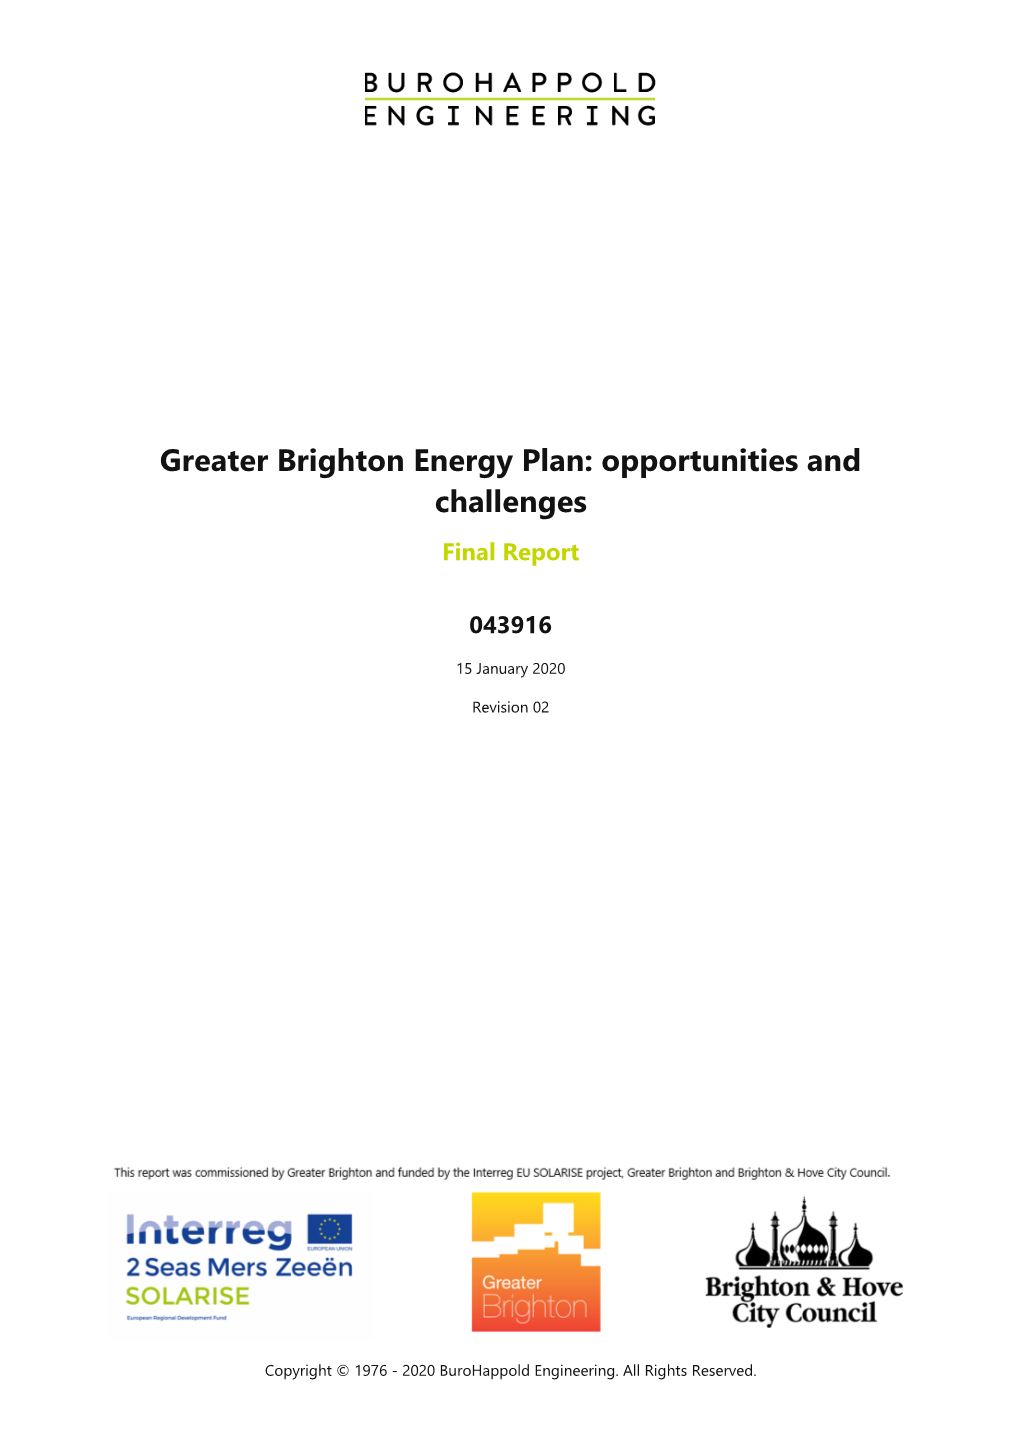 Greater Brighton Energy Plan: Opportunities and Challenges Final Report